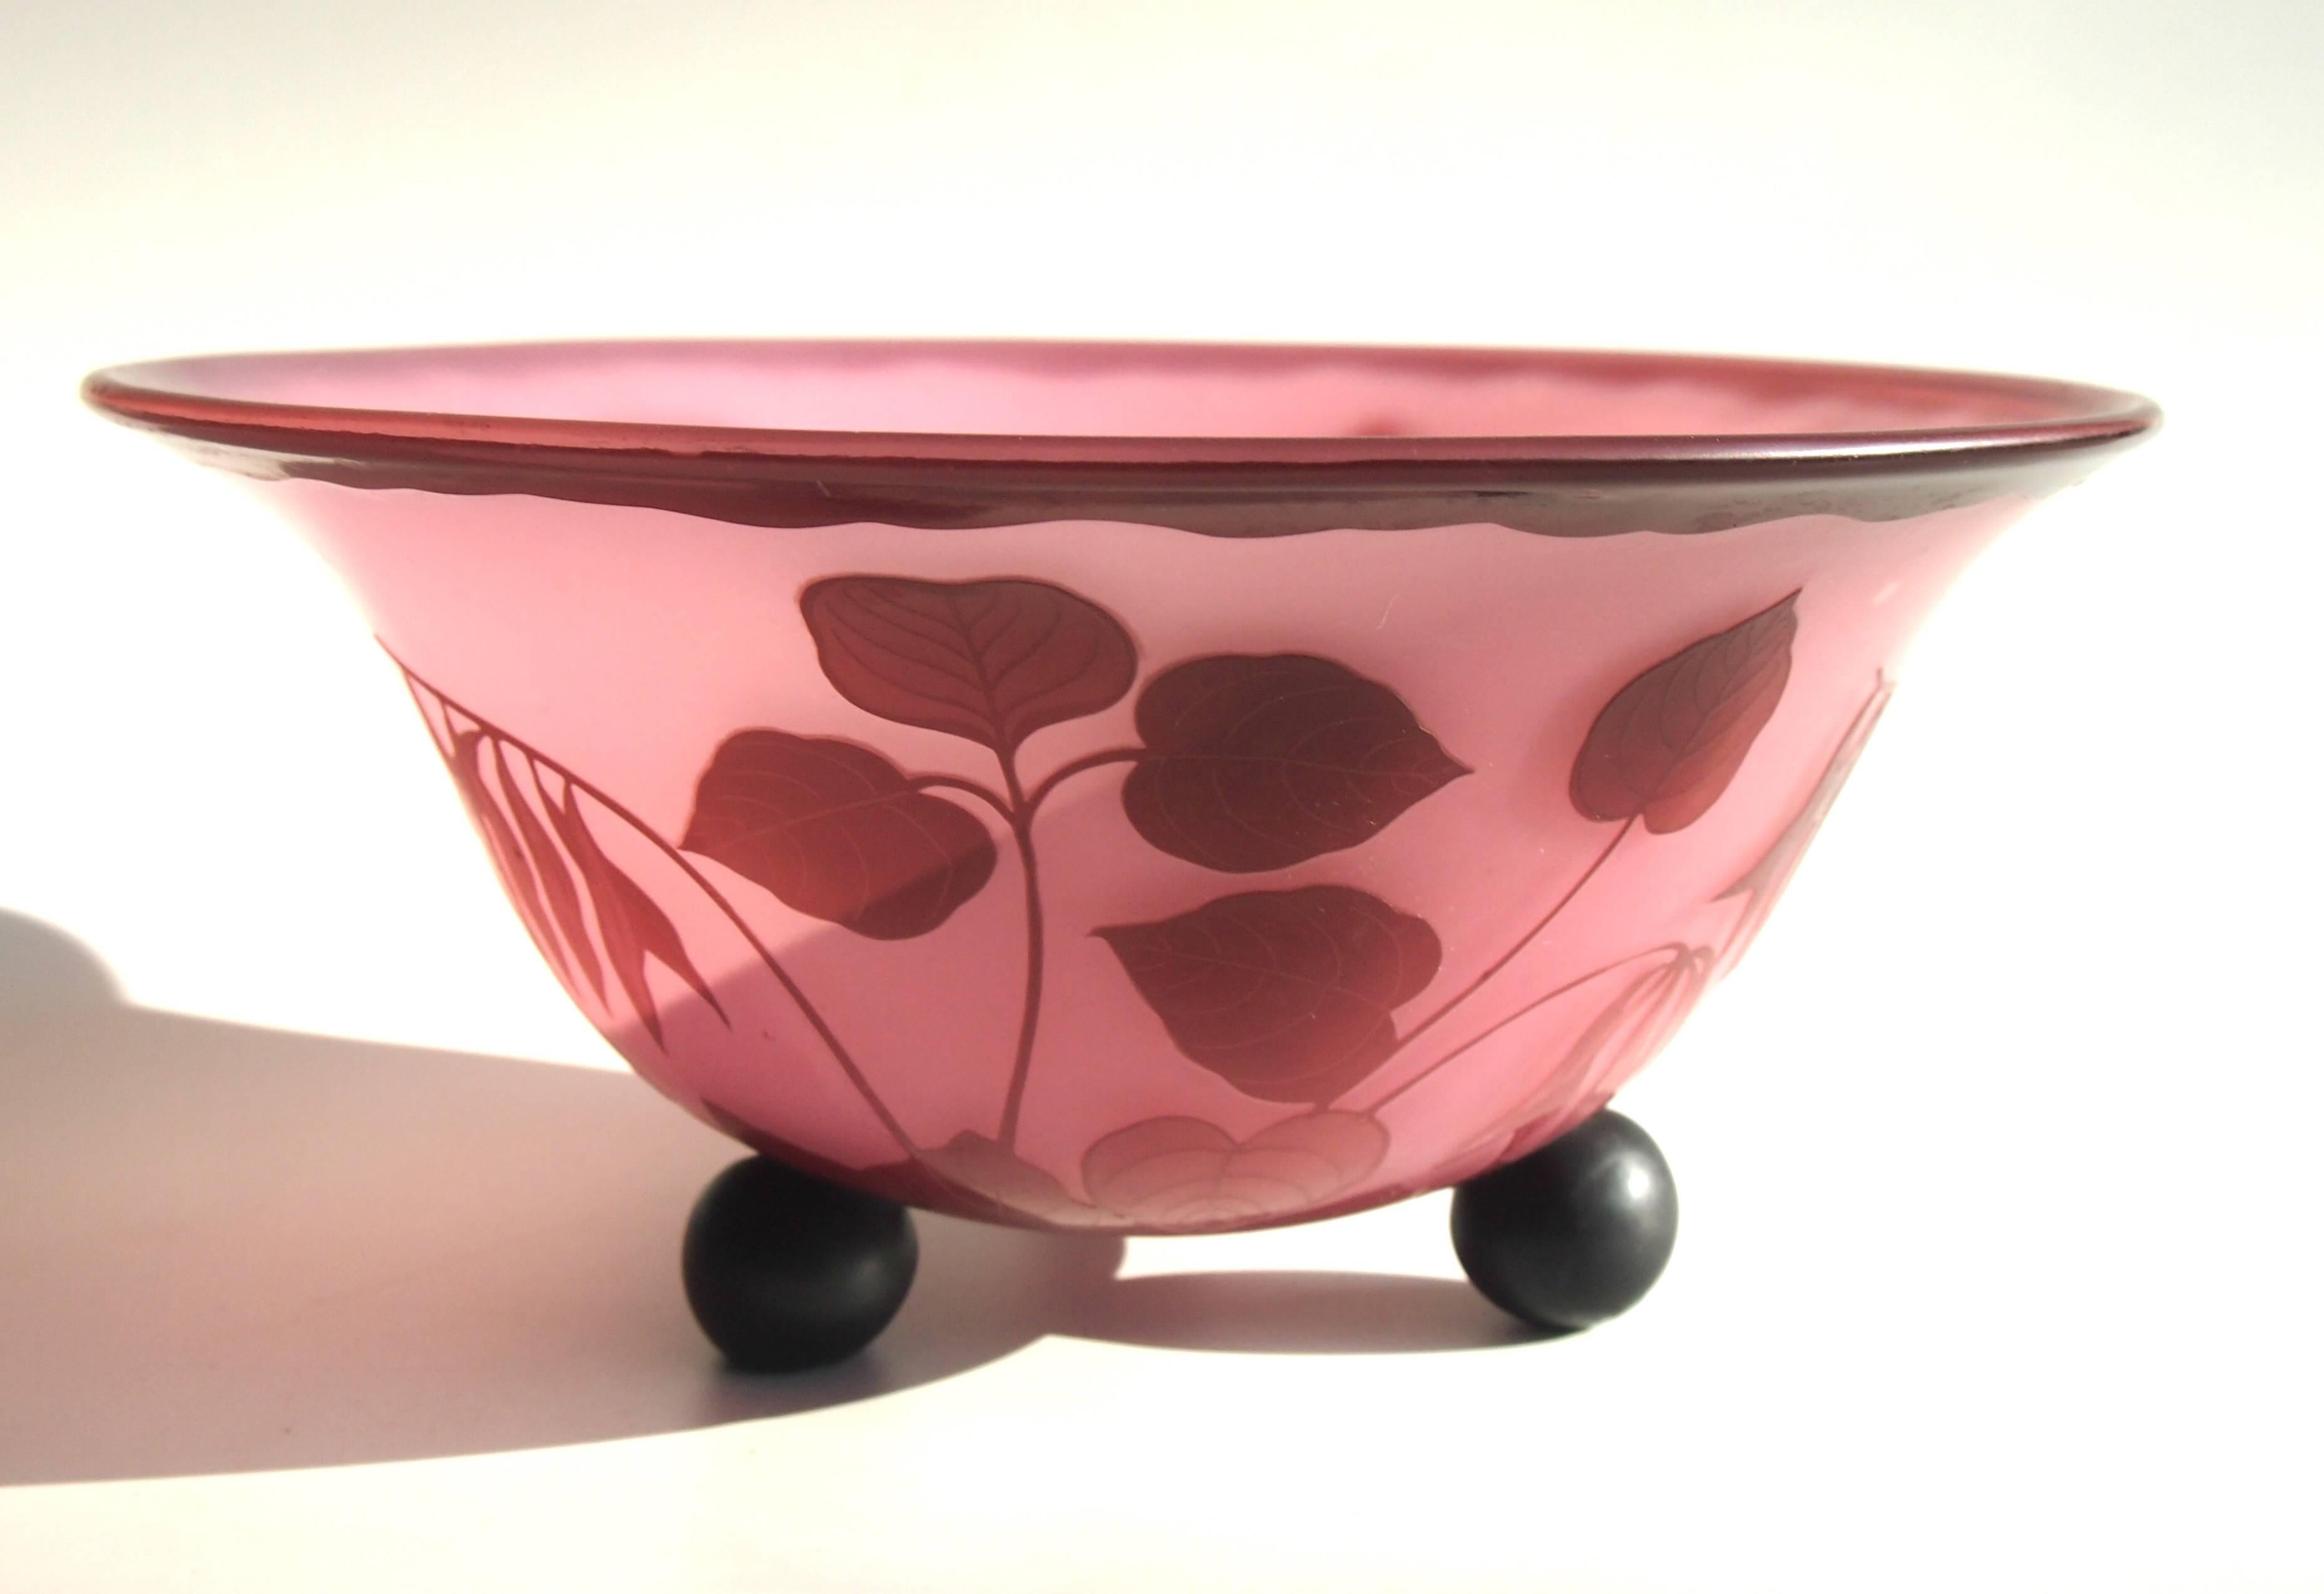 Rare three footed Loetz Art Deco Cameo bowl in purple/pink over pale pink depicting trailing leaves. This is a high quality cameo unlike the pieces signed 'Richard'. 

Loetz was and still is probably the most famous and most collected of the great